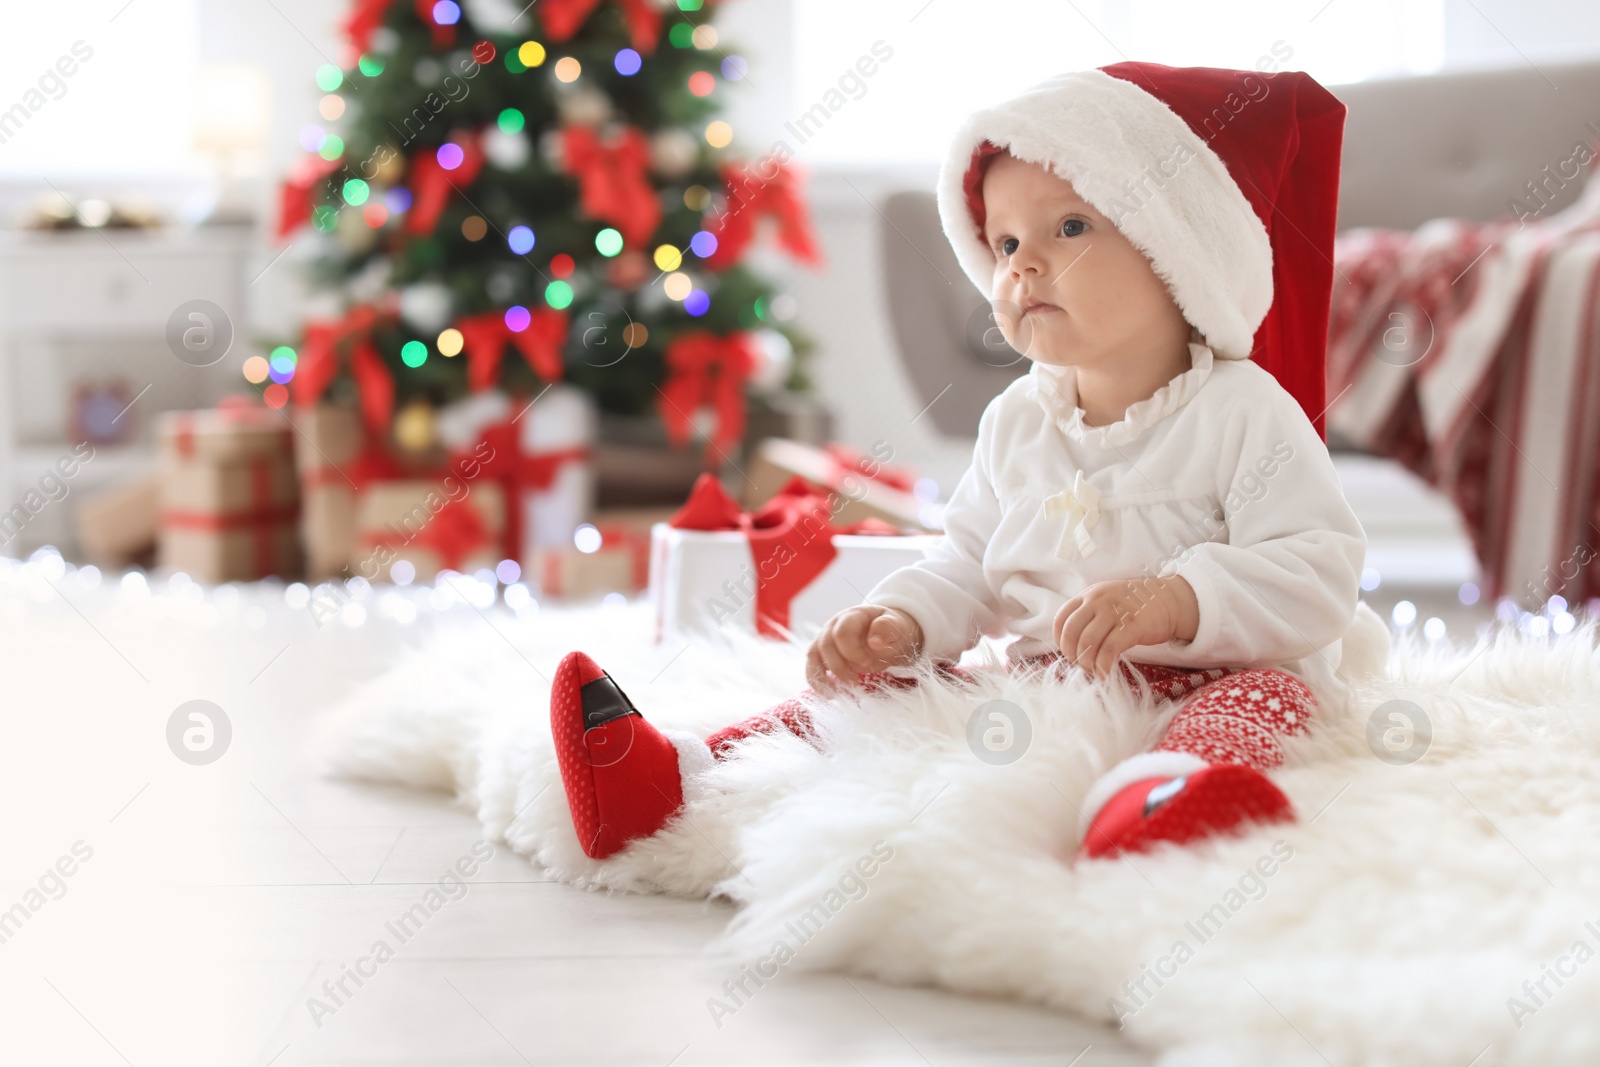 Photo of Cute baby in Santa hat on floor at home. Christmas celebration